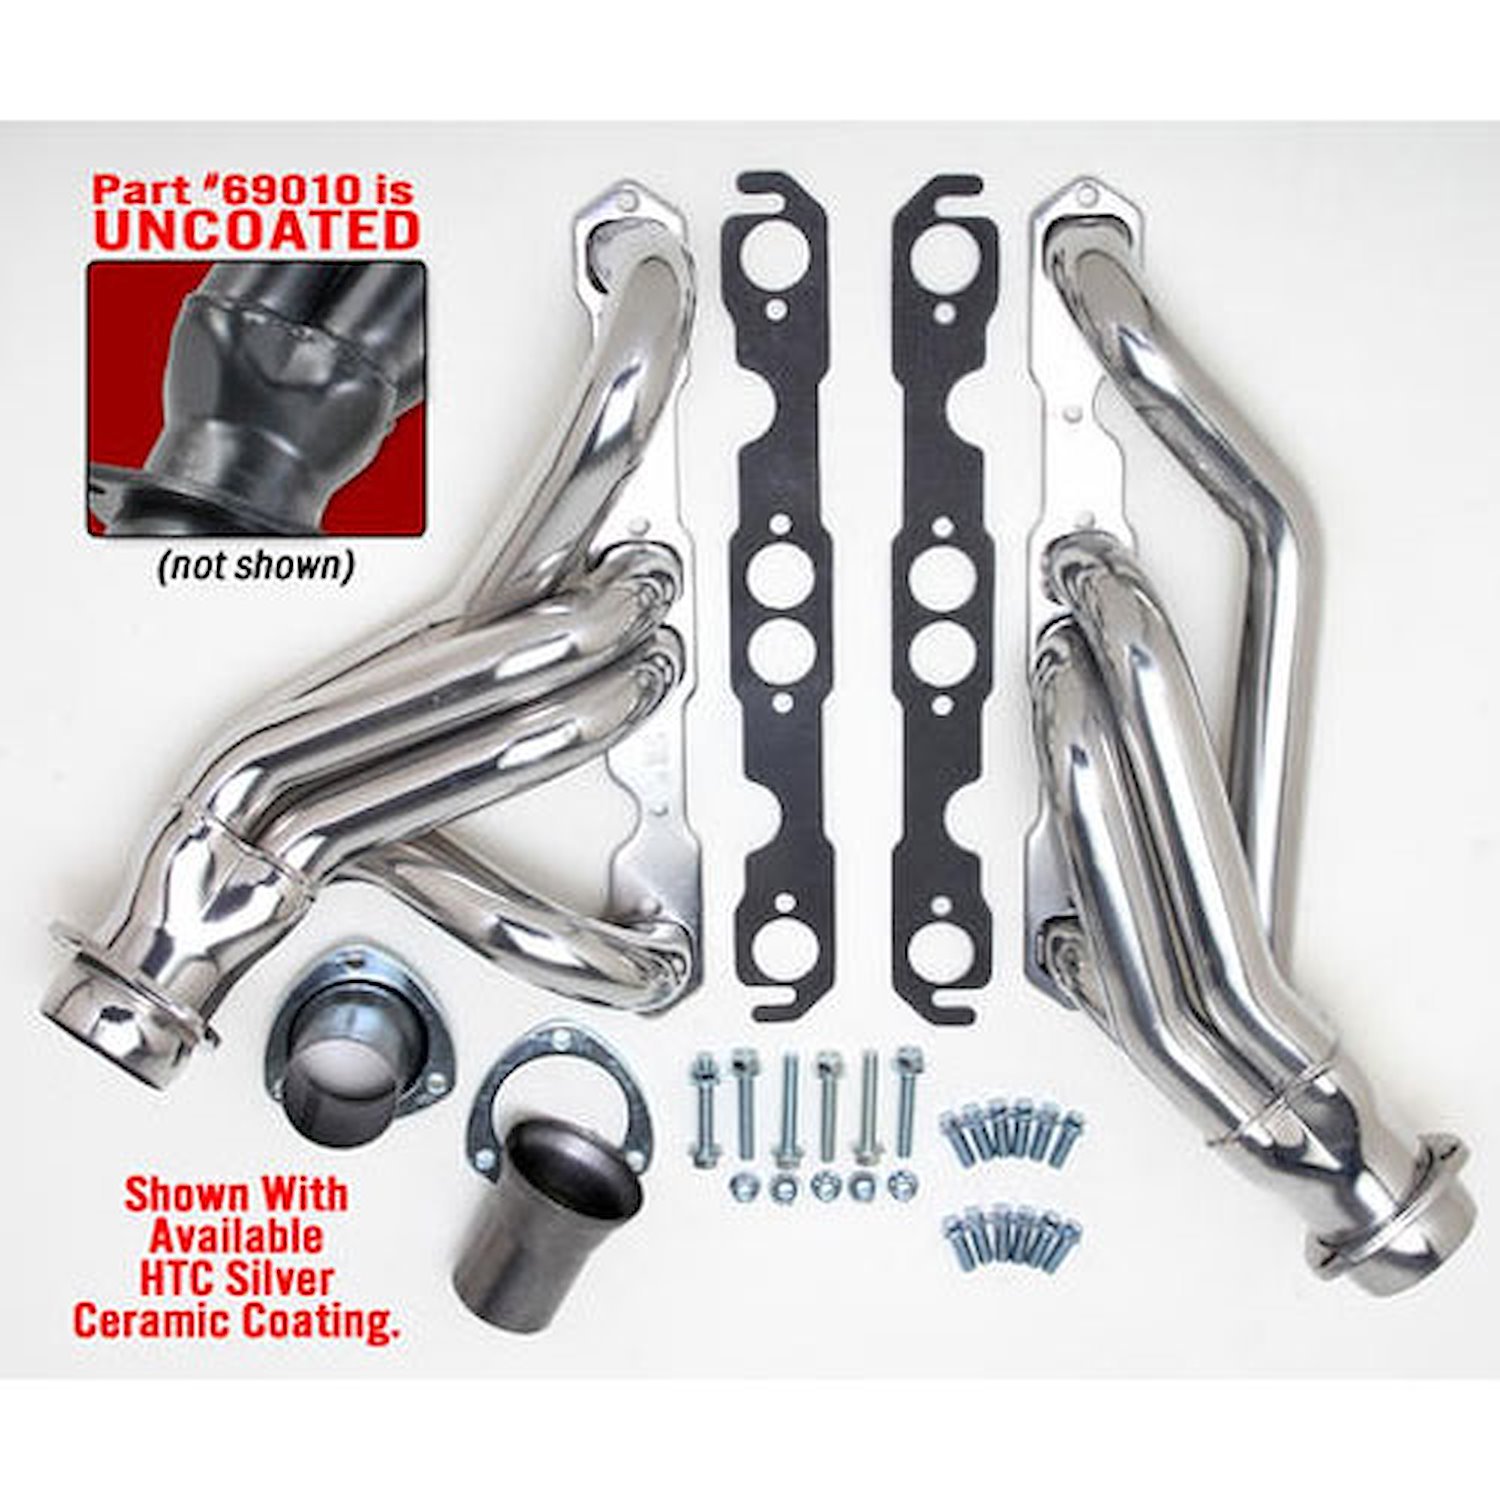 Standard Duty Uncoated Mid-Length Headers for 1967-for 1987 Chevy/GMC C10/C20 PICKUP w/SBC